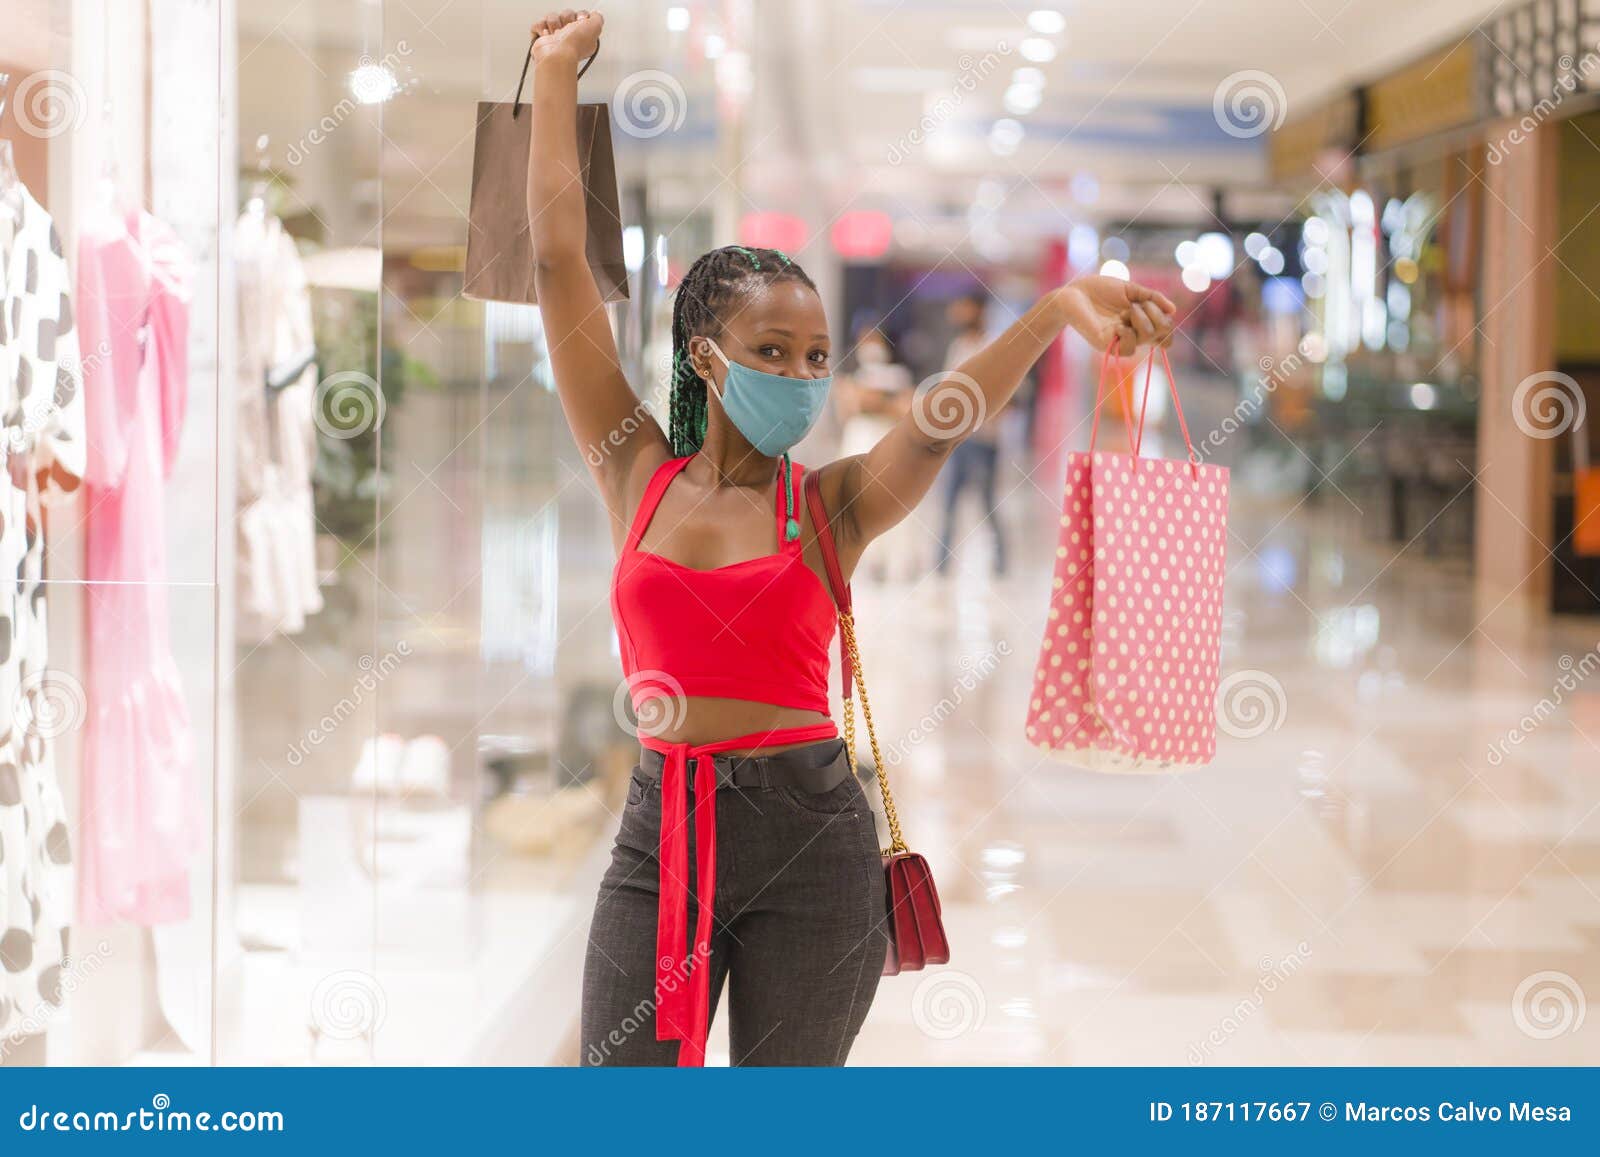 Young African American Woman at Shopping Mall in New Normal after Covid ...